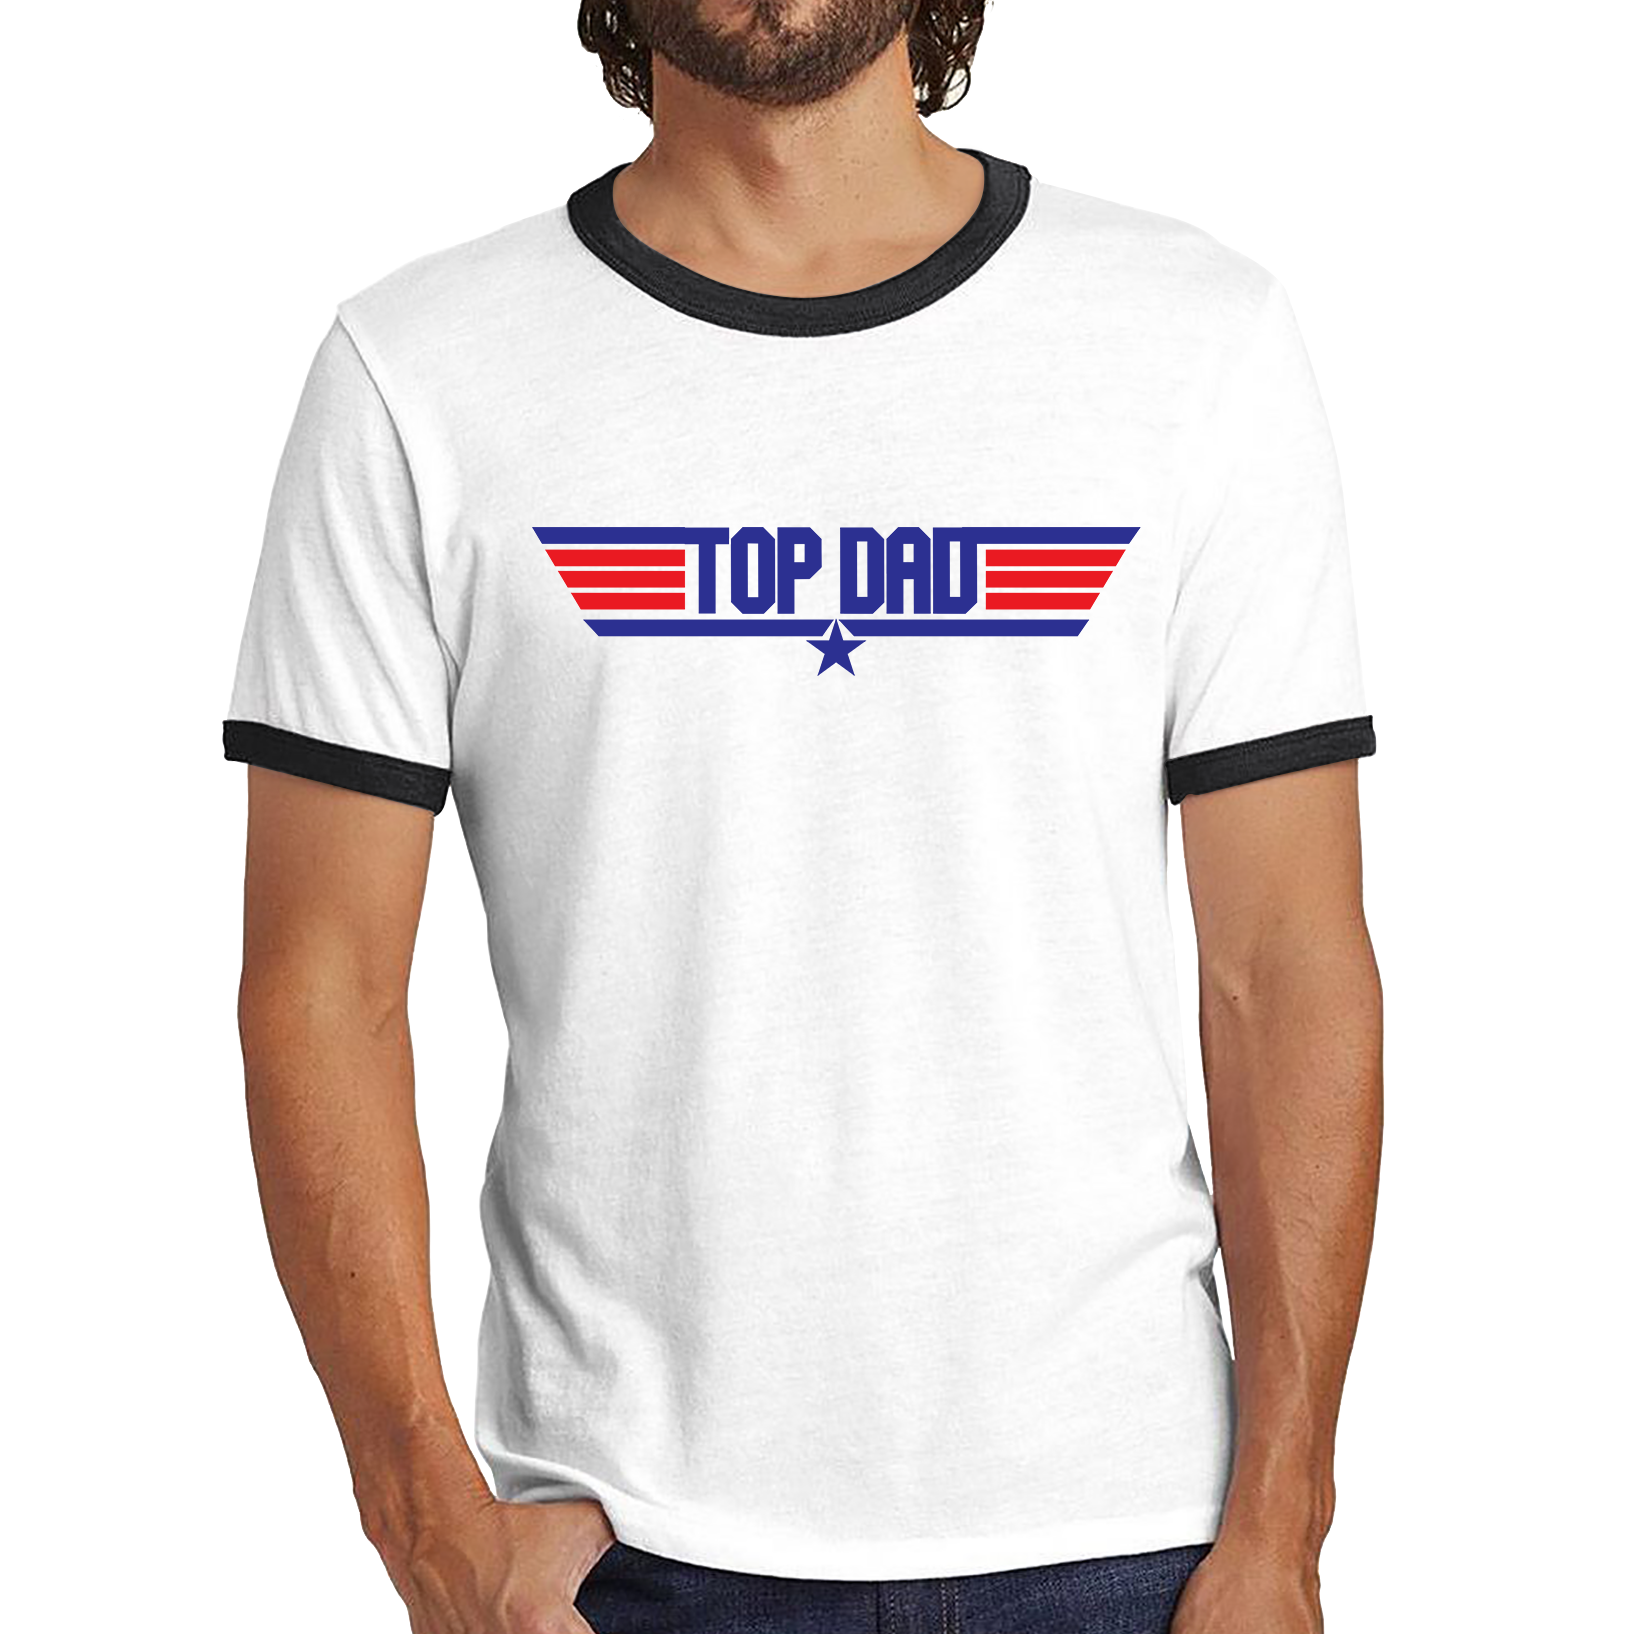 Top Dad Fathers Day Funny Top Gun Spoof Action Adventure Film Best Dad Gift For Father Ringer T Shirt